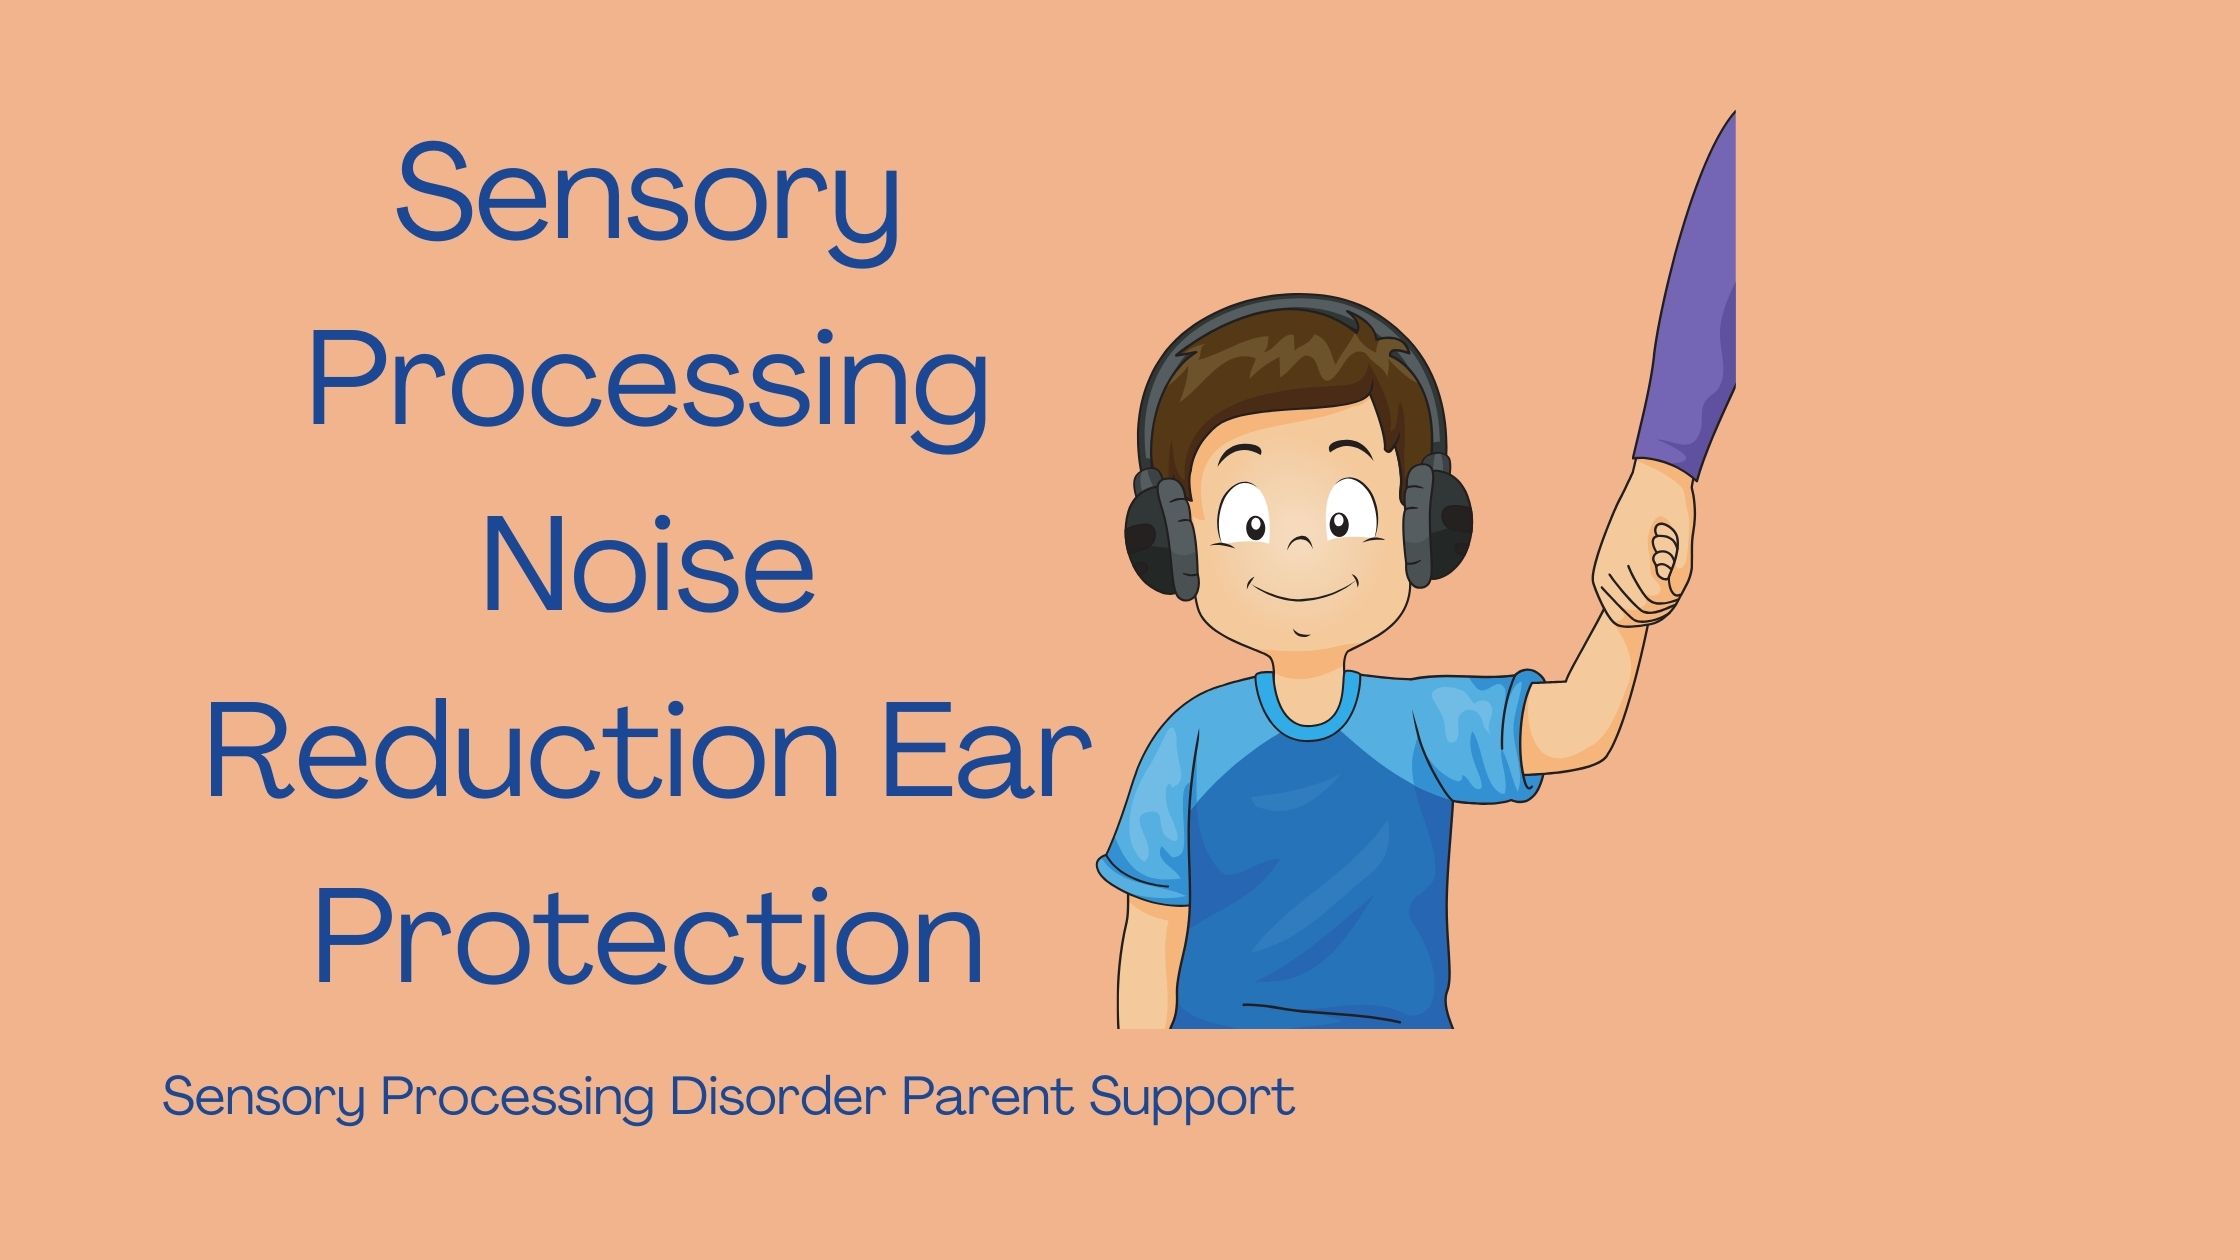 child with sensory processing disorder wearing noise reduction headphones Sensory Processing Noise Reduction Ear Protection